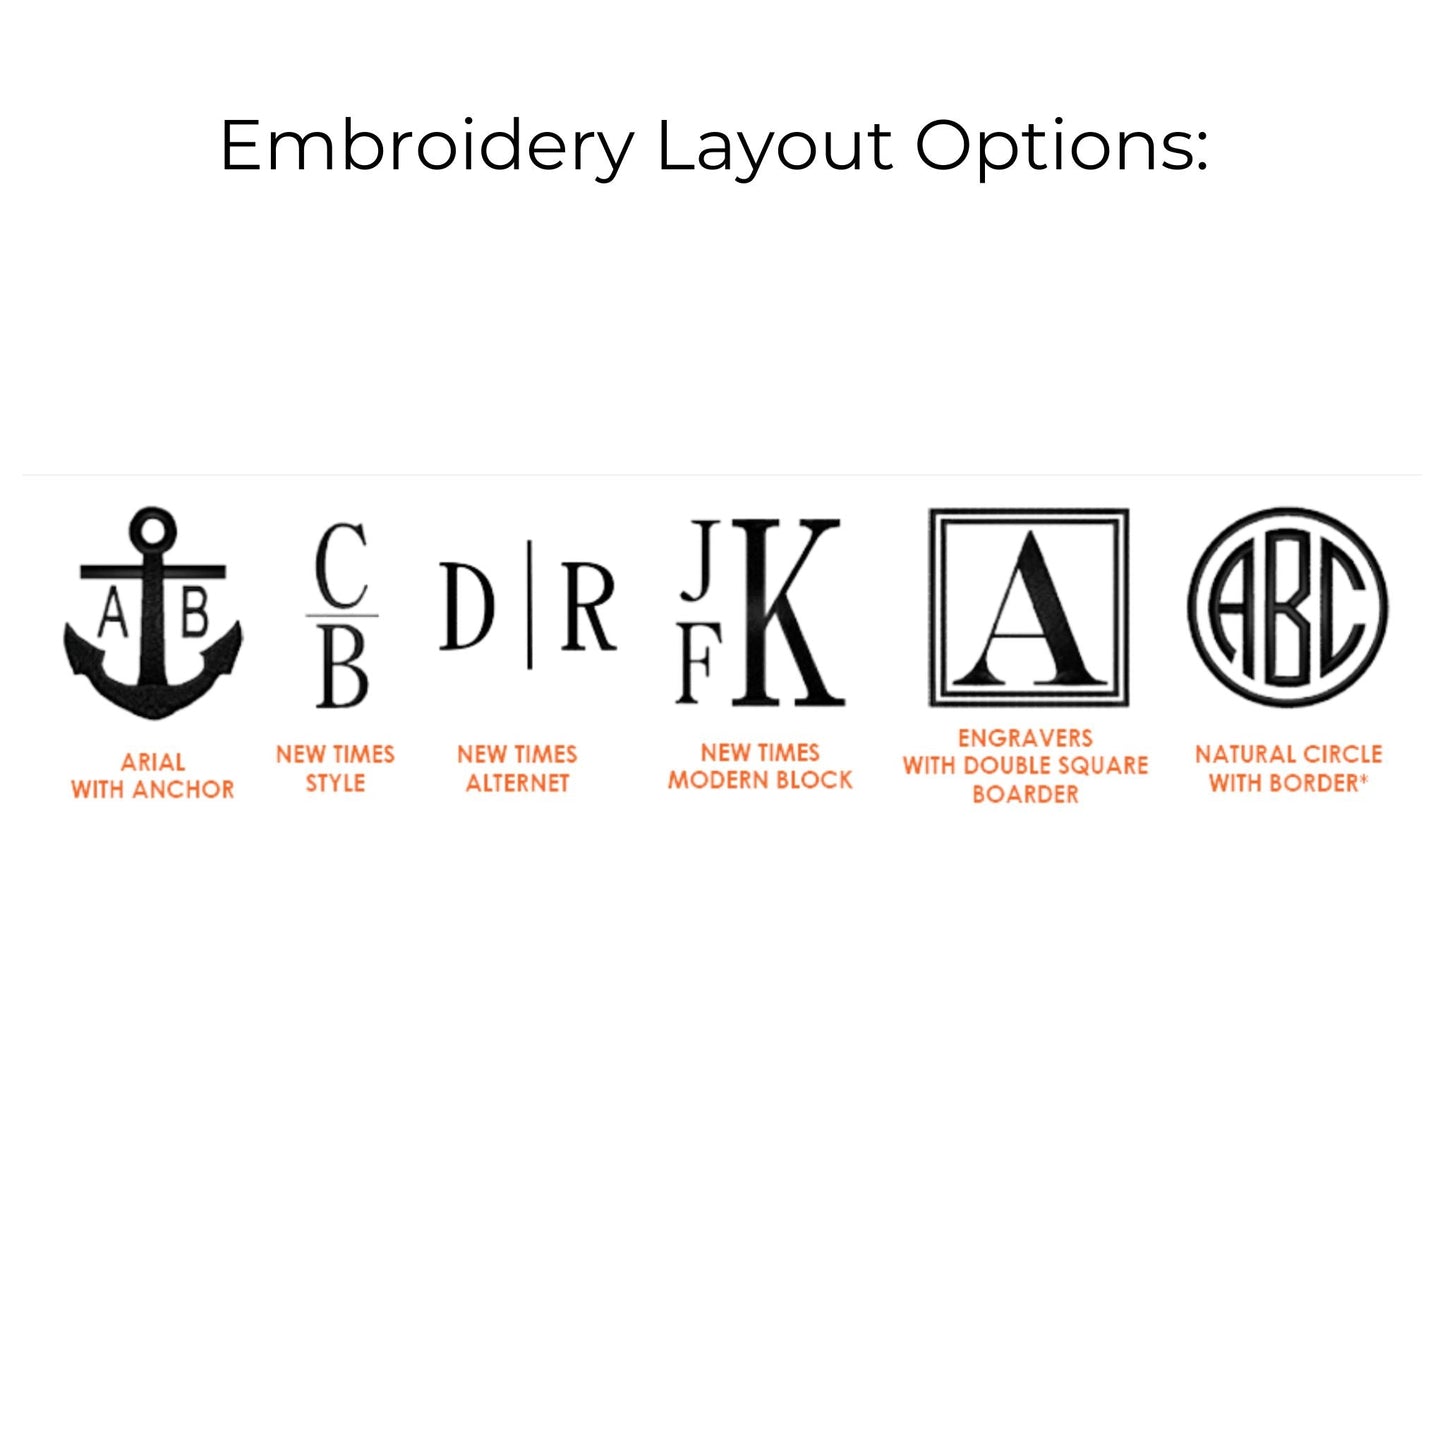 Embroidery layout options by Winston's Collection